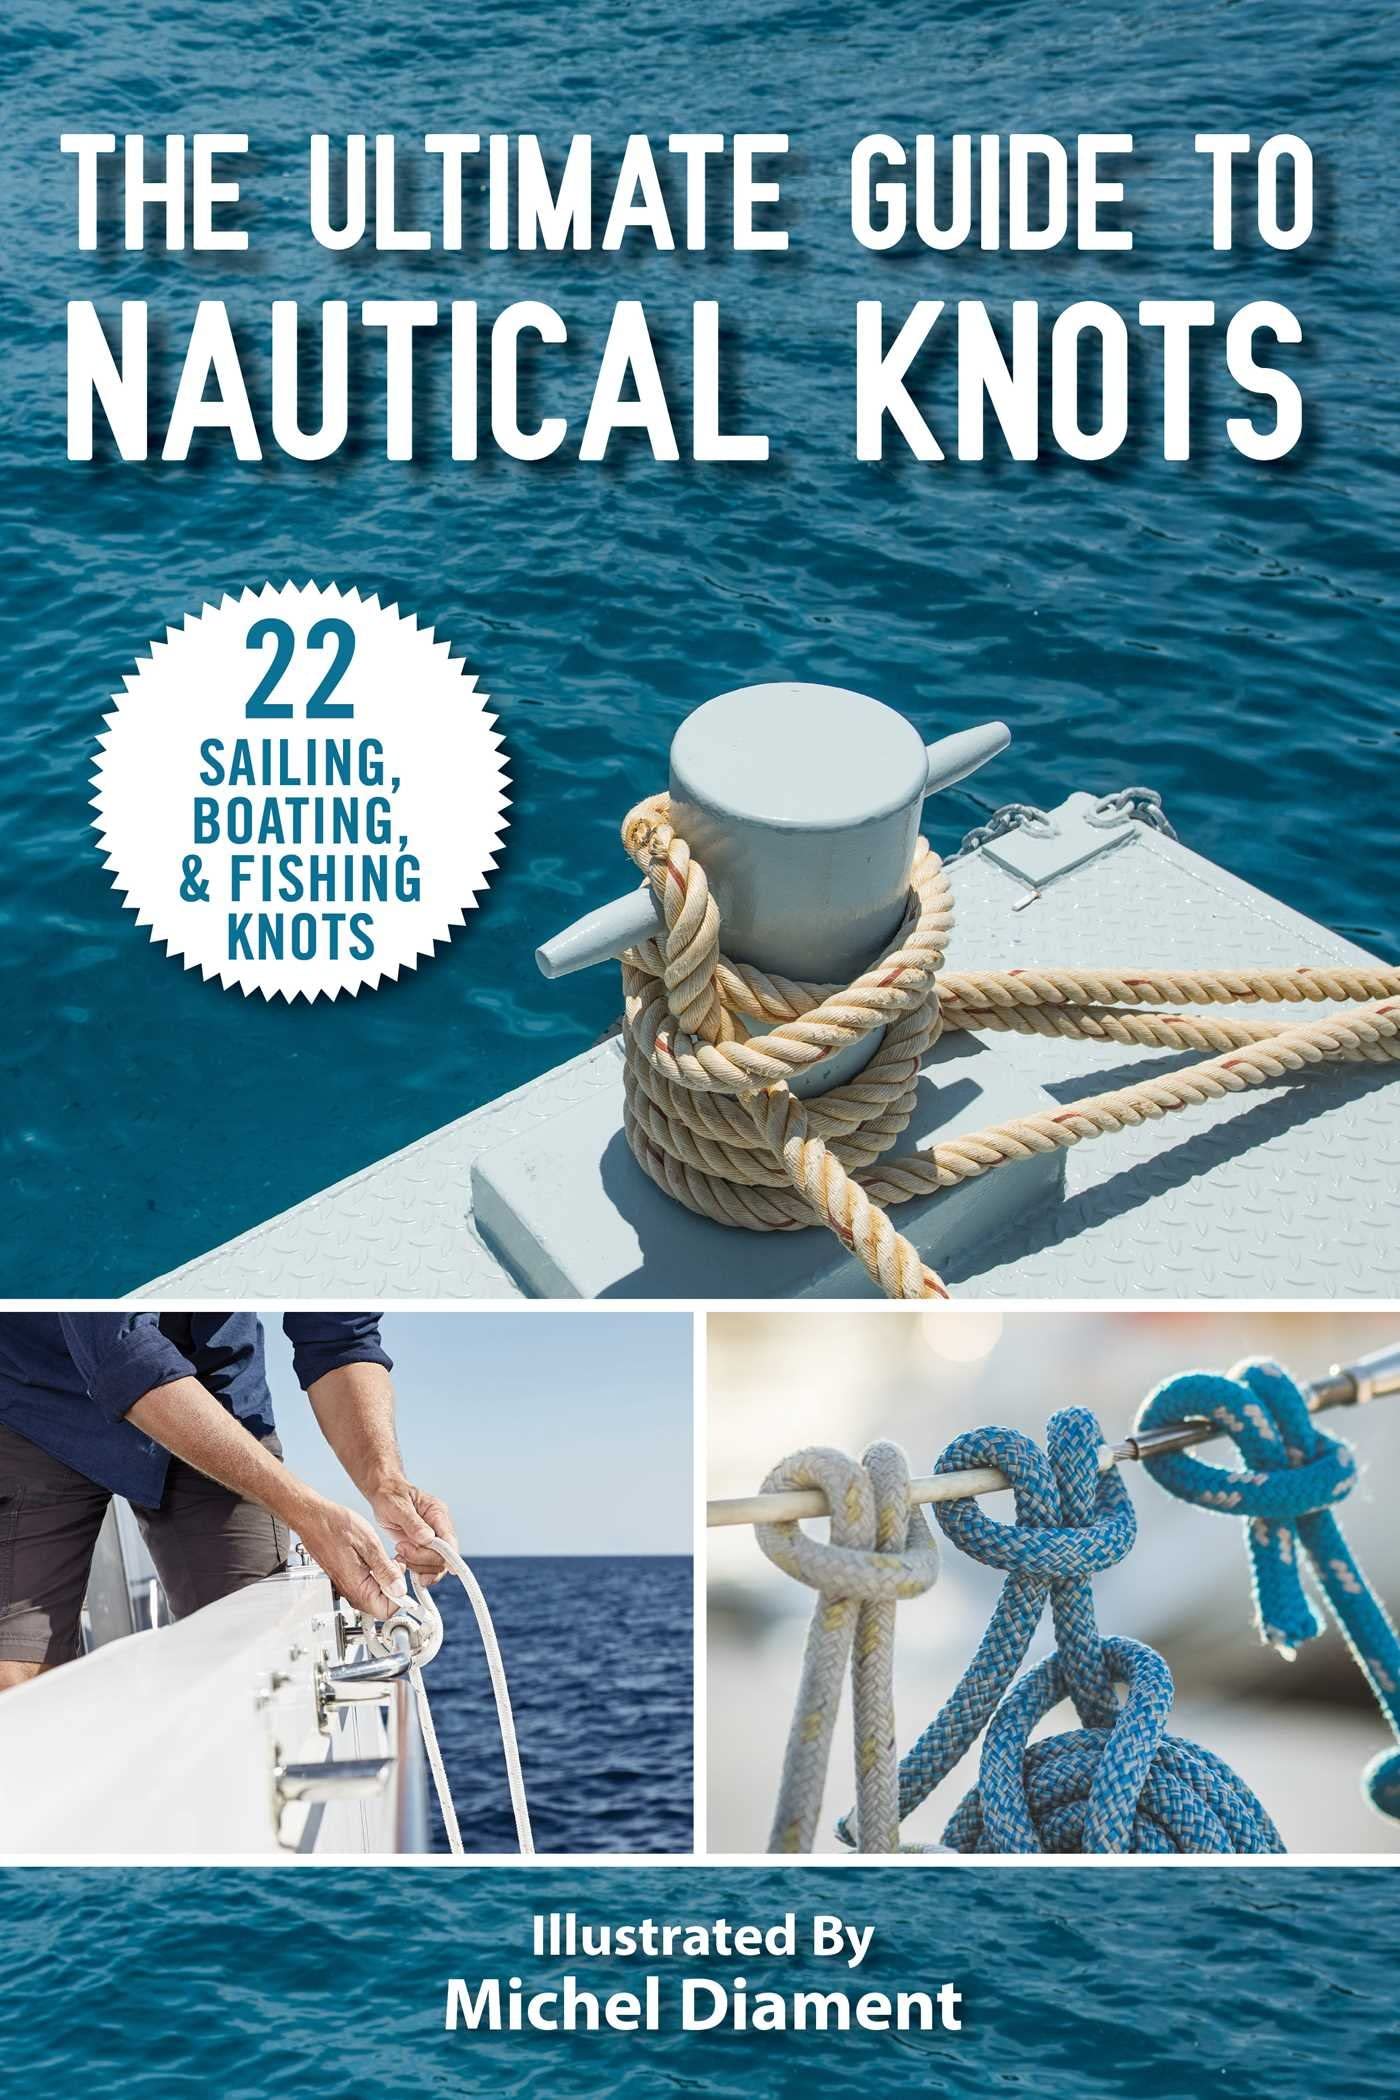 Nautical Books :: Boating Skills & How-To :: Knots, Canvaswork & Rigging ::  The Ultimate Guide to Nautical Knots